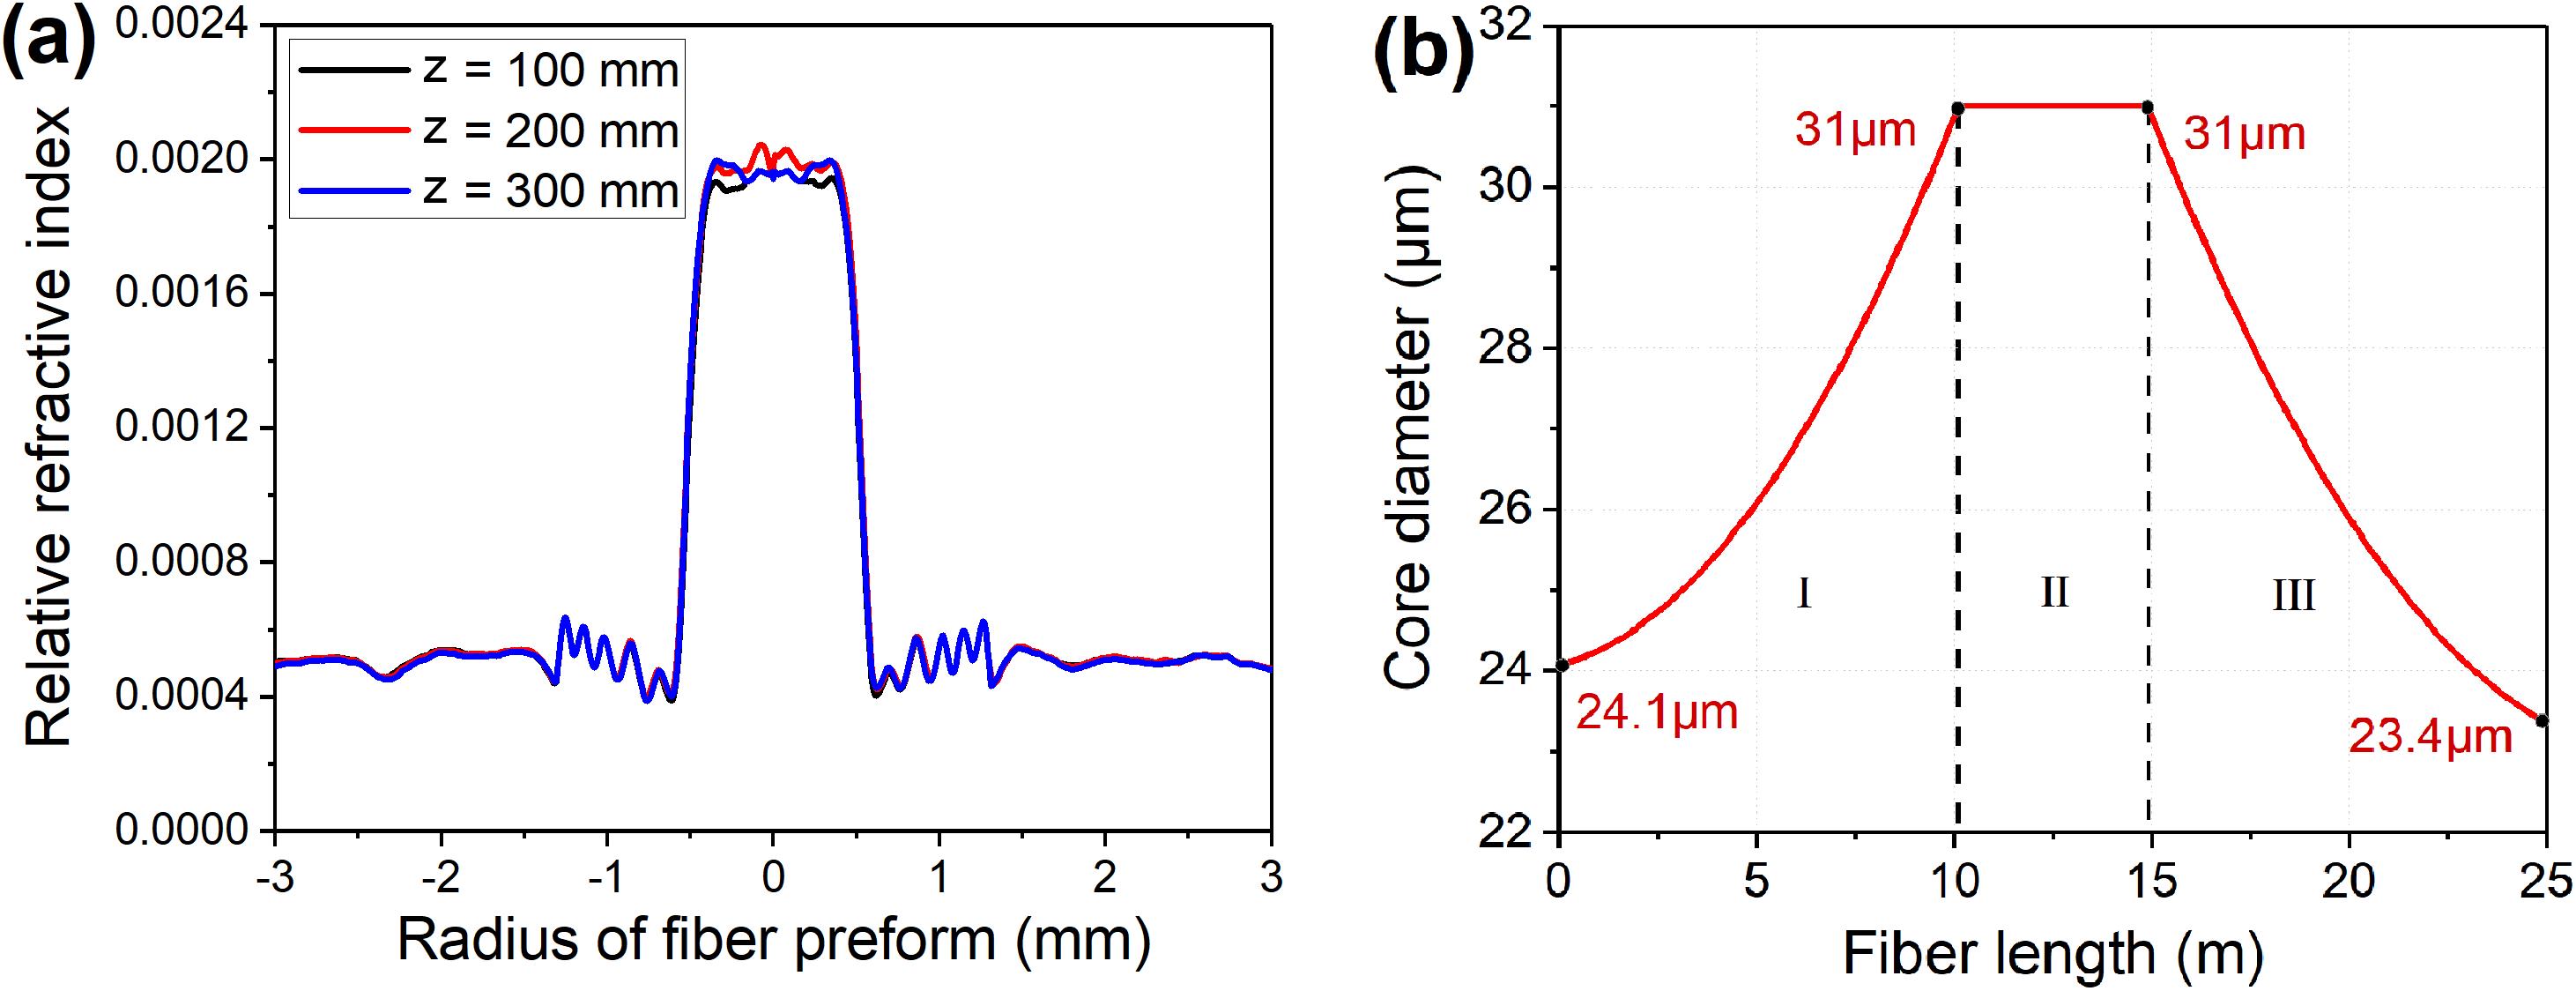 (a) Refractive index profile at different positions along the length of the preform and (b) the core diameter distribution of the fabricated CCTC fiber.